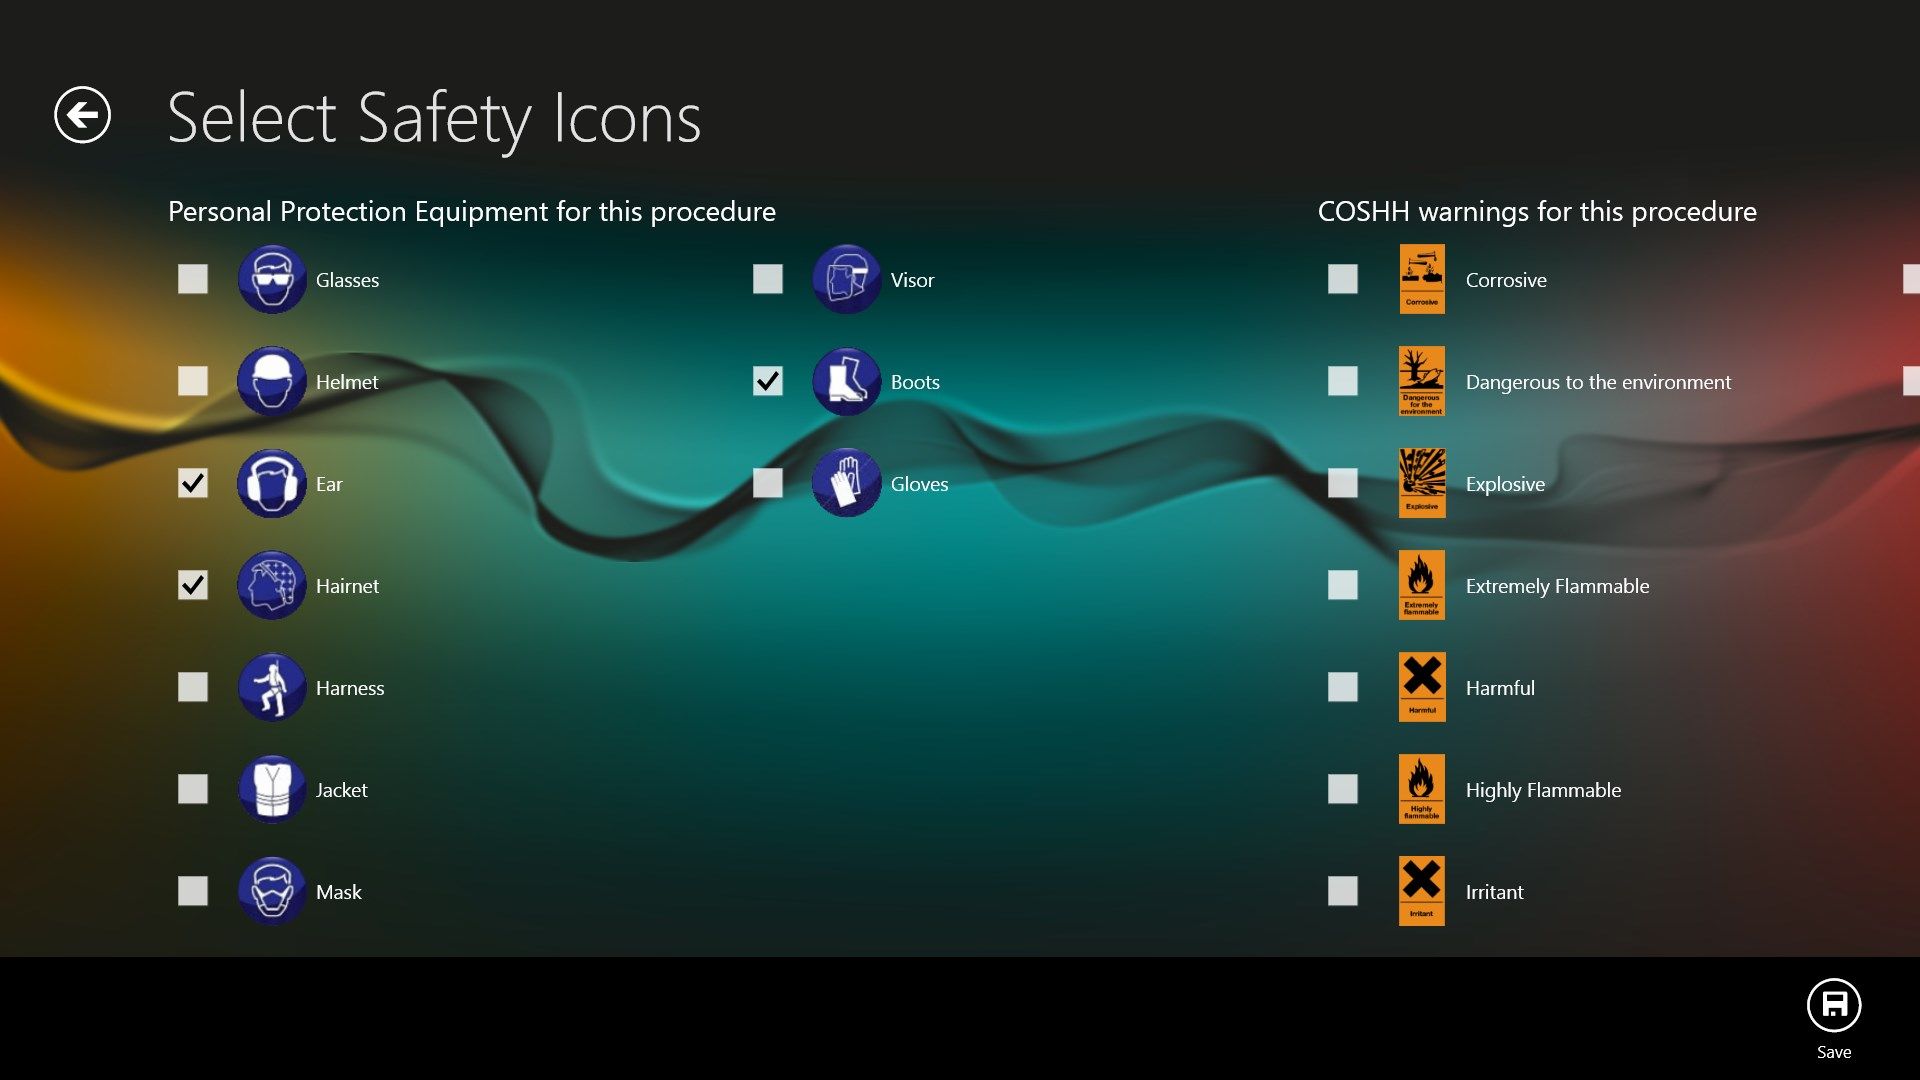 Adding Health and safety icons